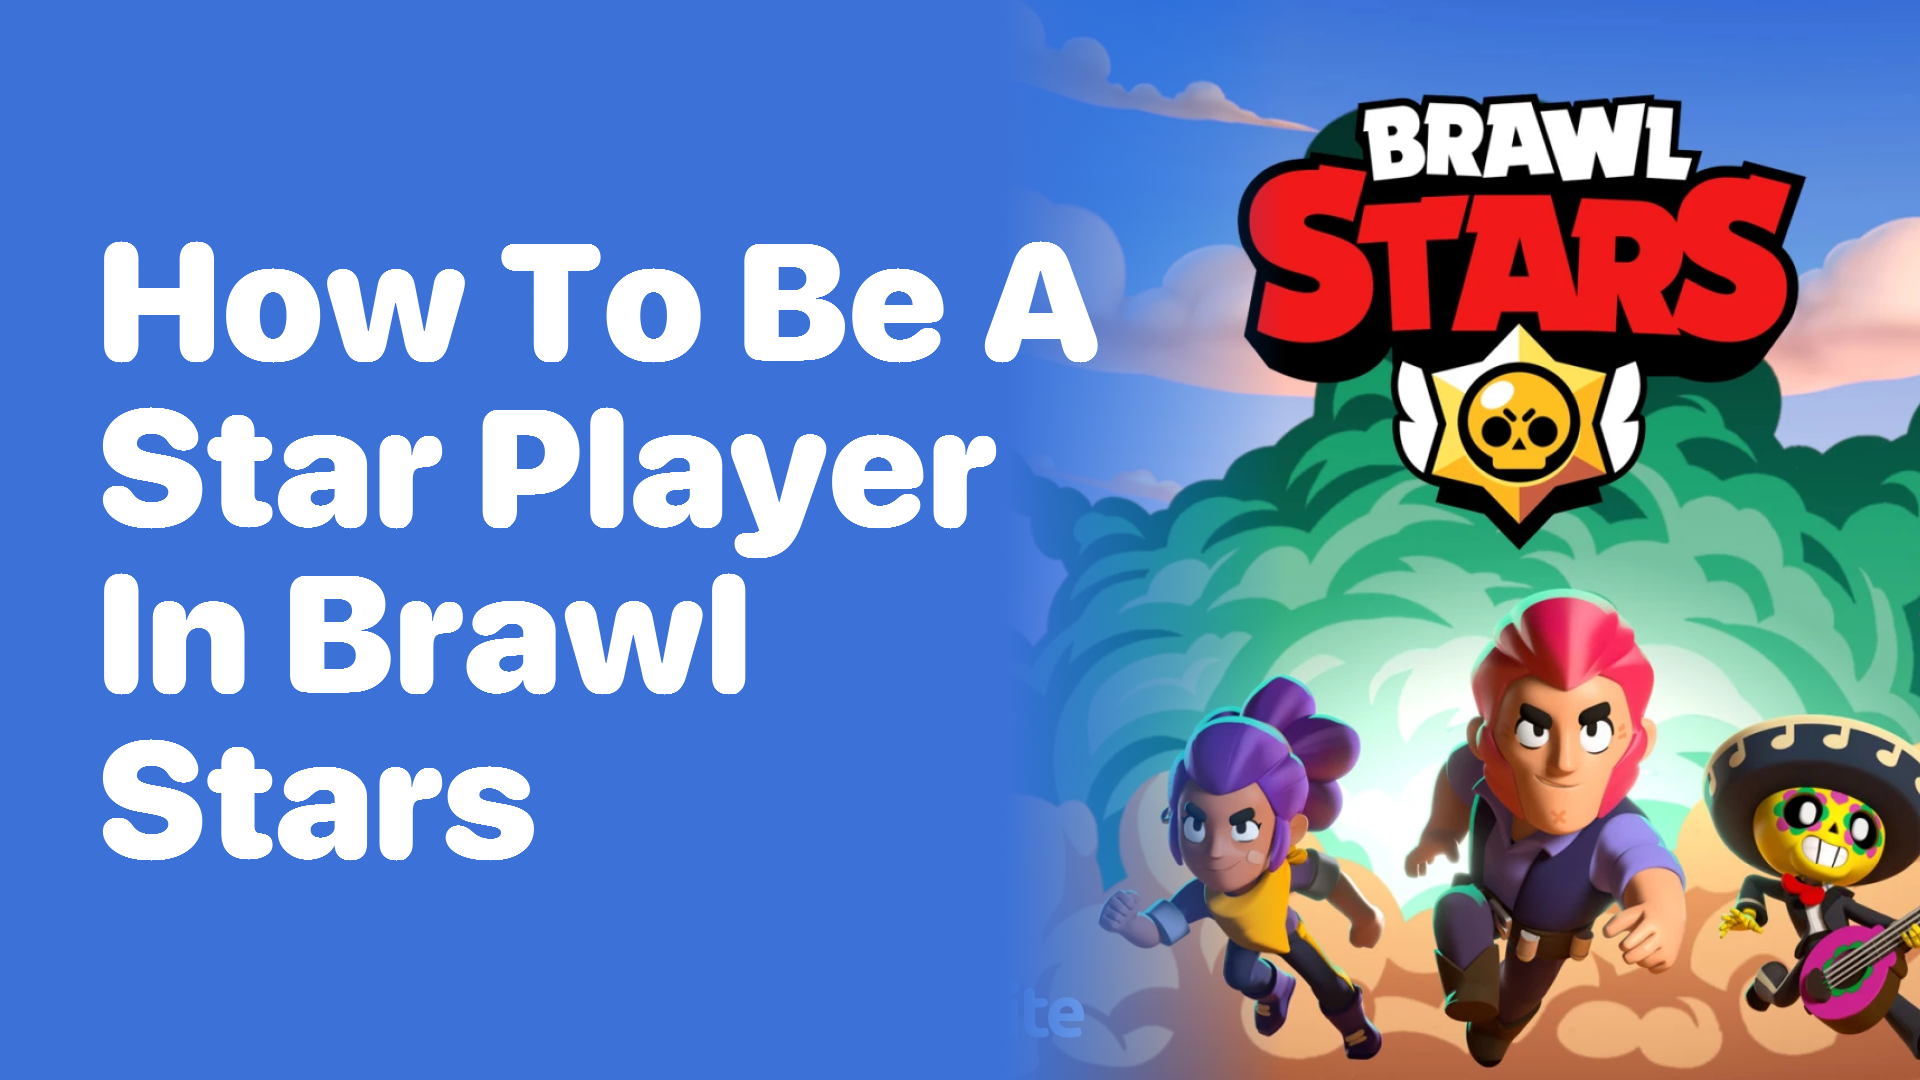 How to Be a Star Player in Brawl Stars